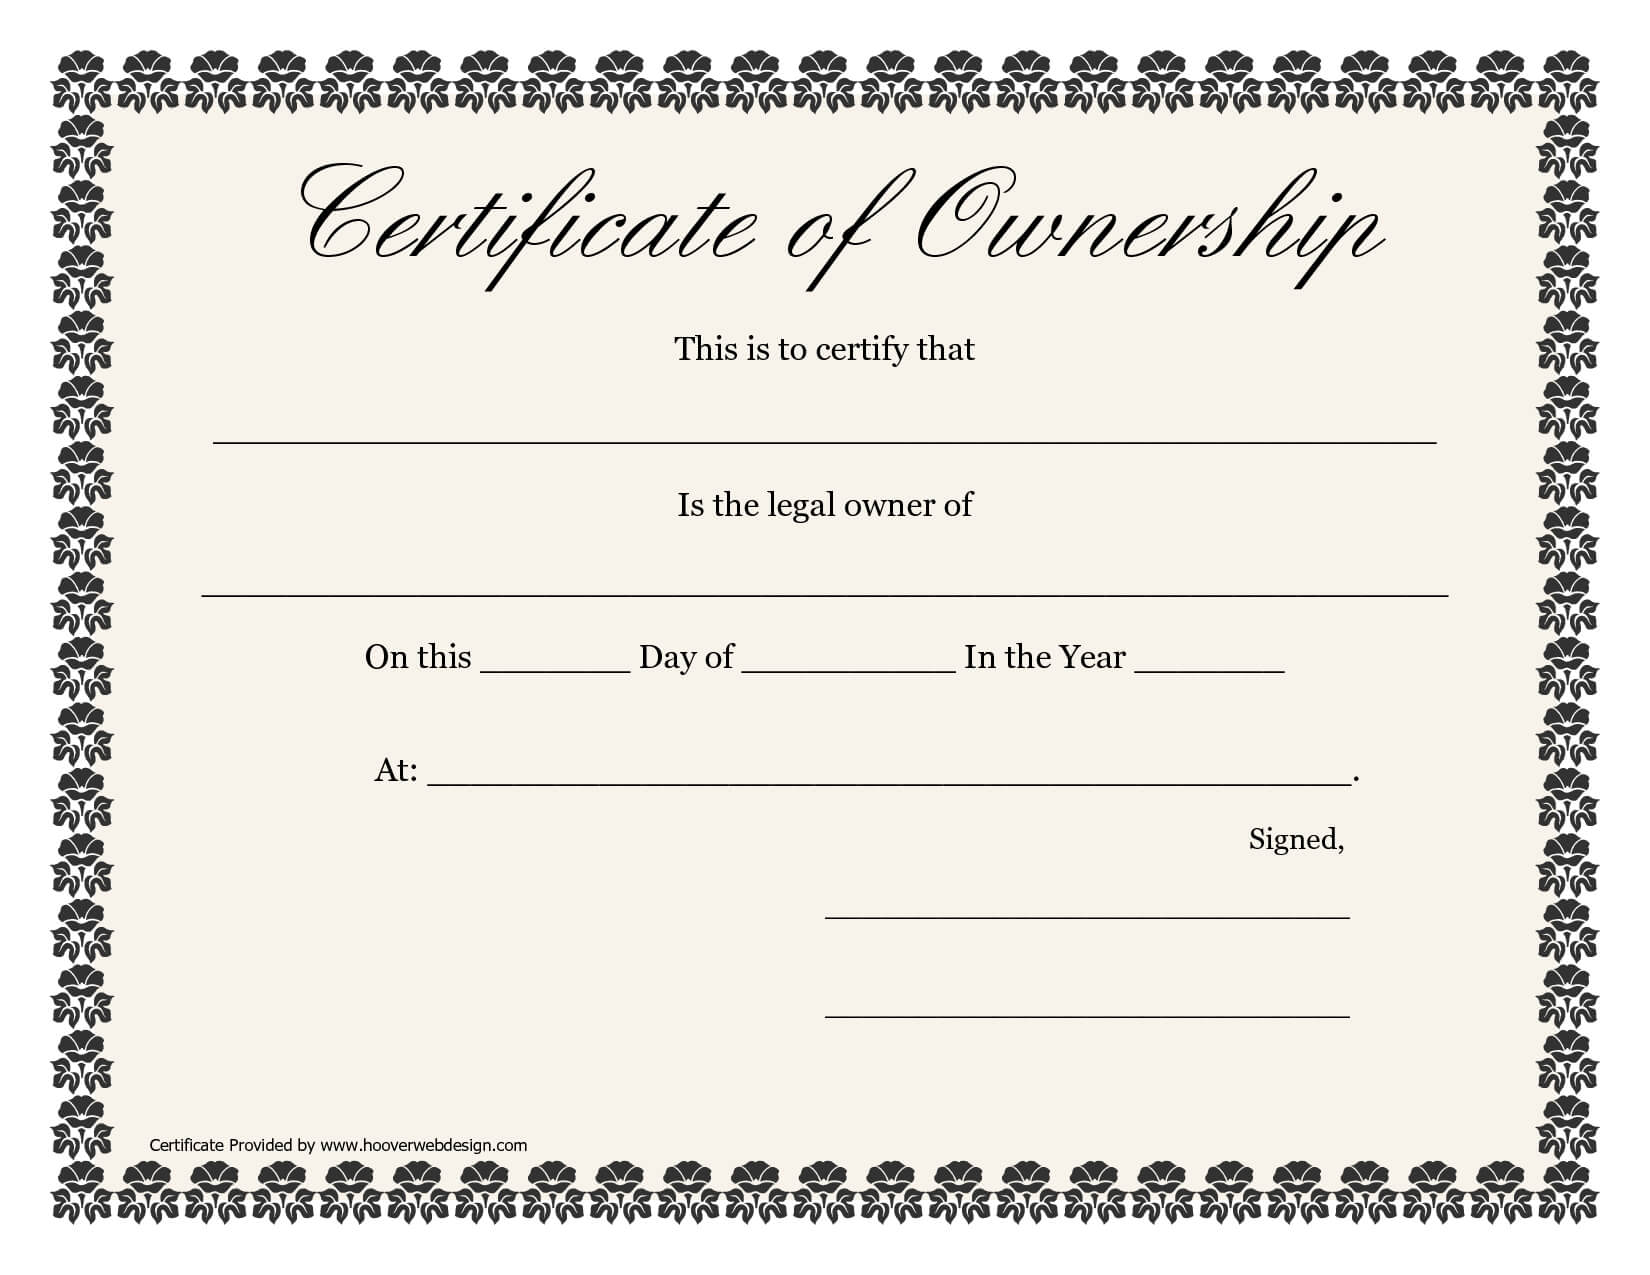 ❤️5+ Free Sample Of Certificate Of Ownership Form Template❤️ With Ownership Certificate Template